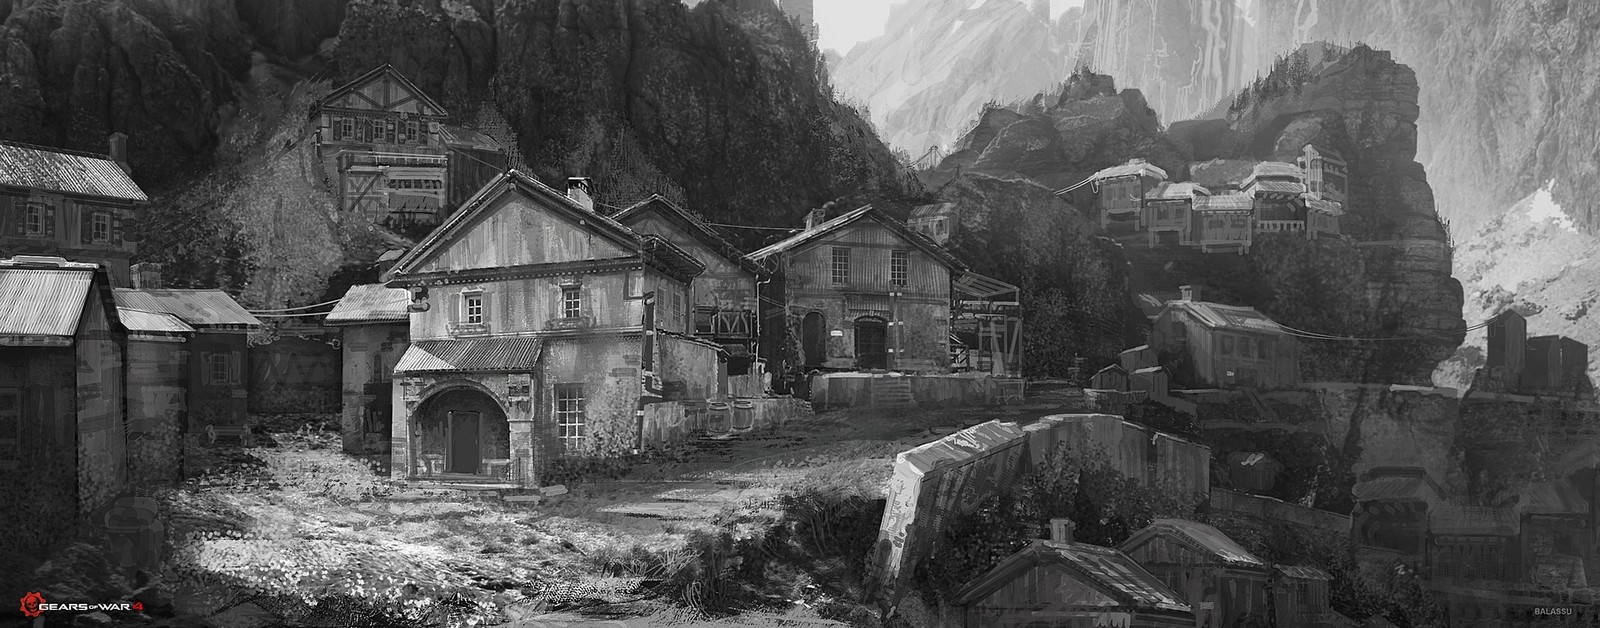 GEARS OF WAR 4 - OUTSIDER VILLAGE - EARLY EXPLORATION SKETCH 01